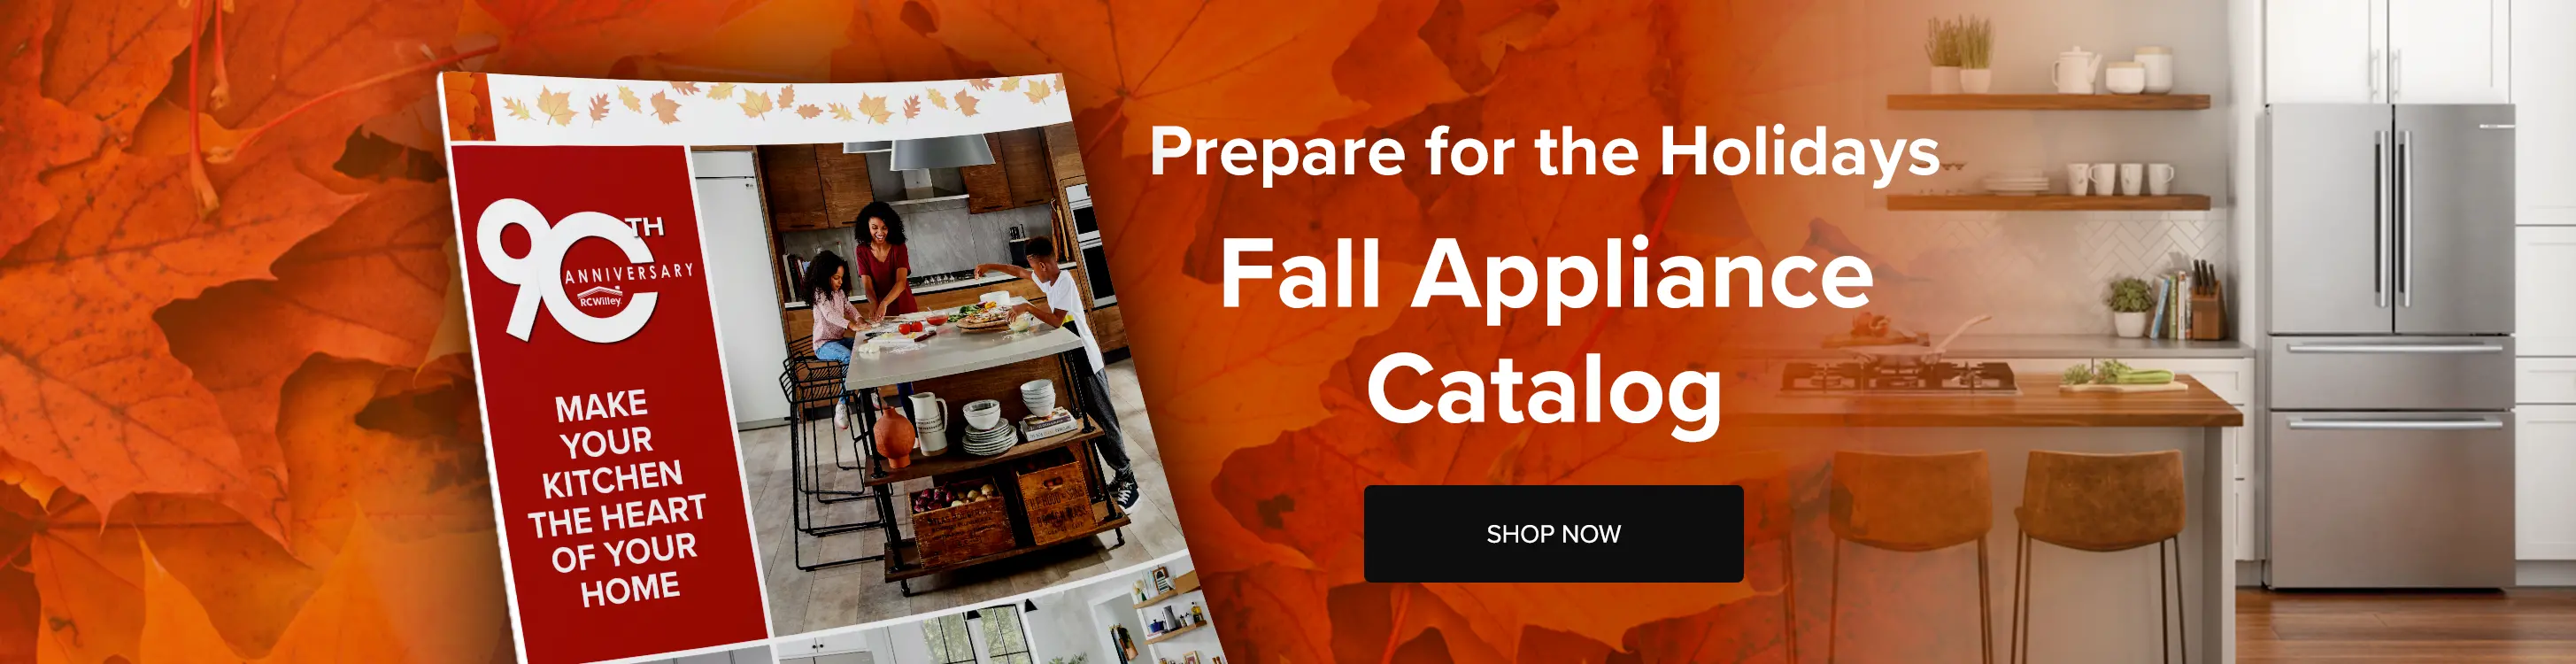 Prepare for the Holidays and Shop our Fall Appliance Catalog Now!